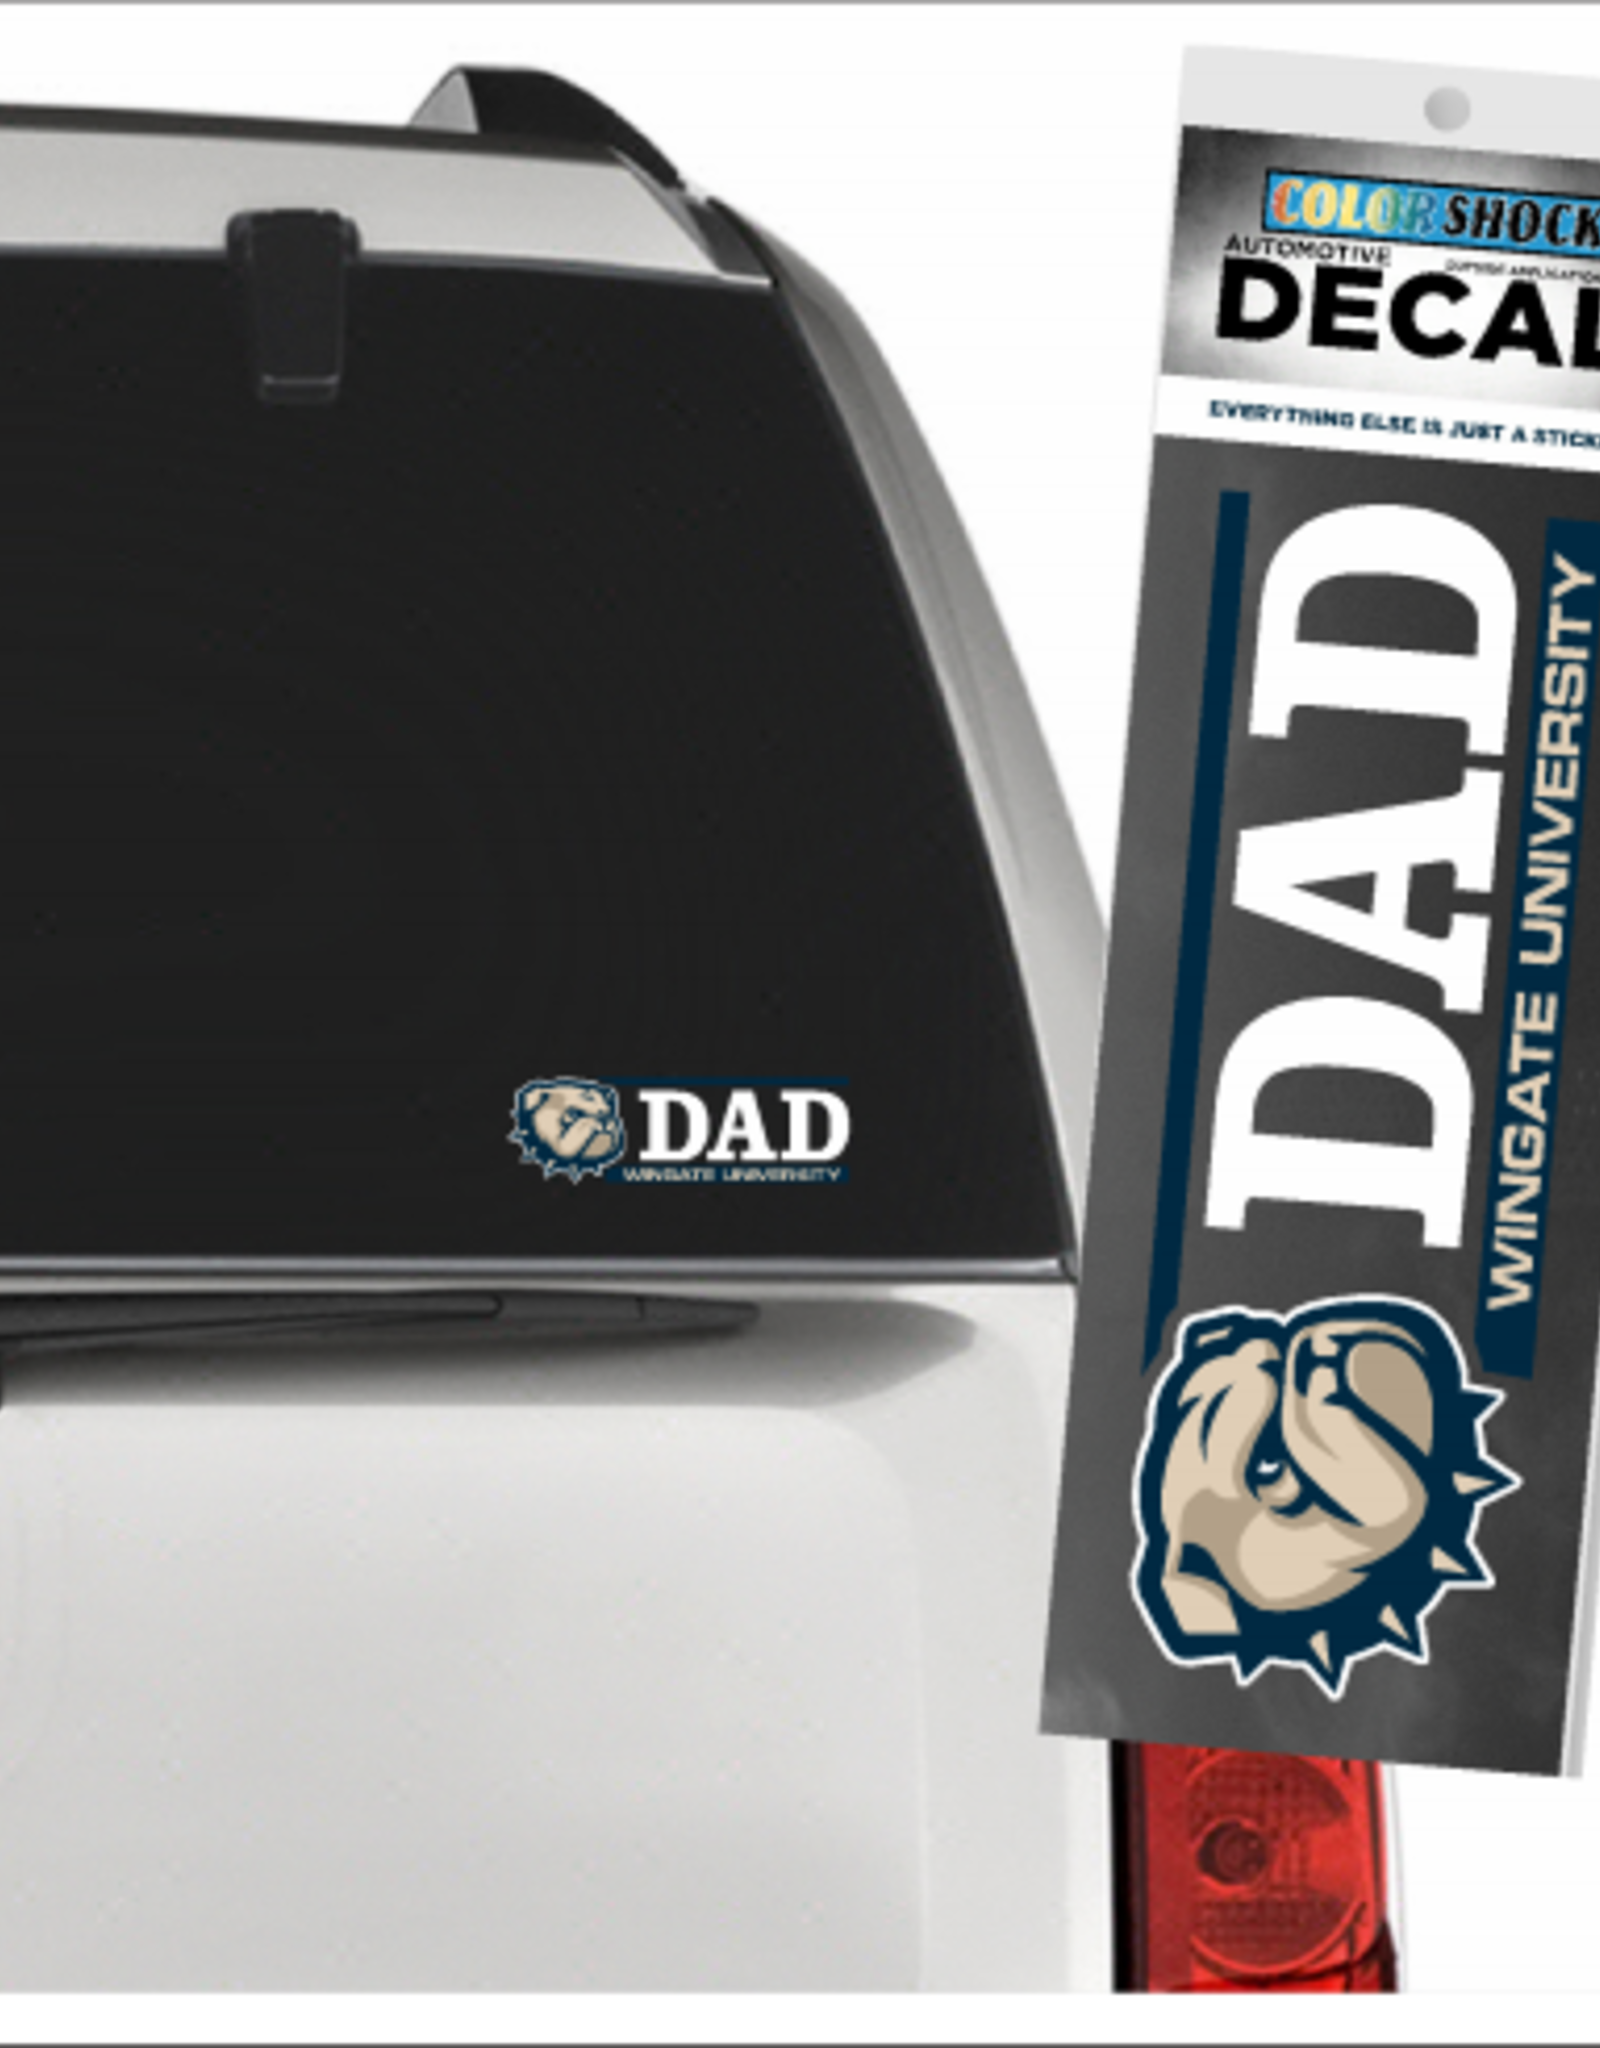 CDI 2 x 6 Dog Head Dad Over Wingate University Decal